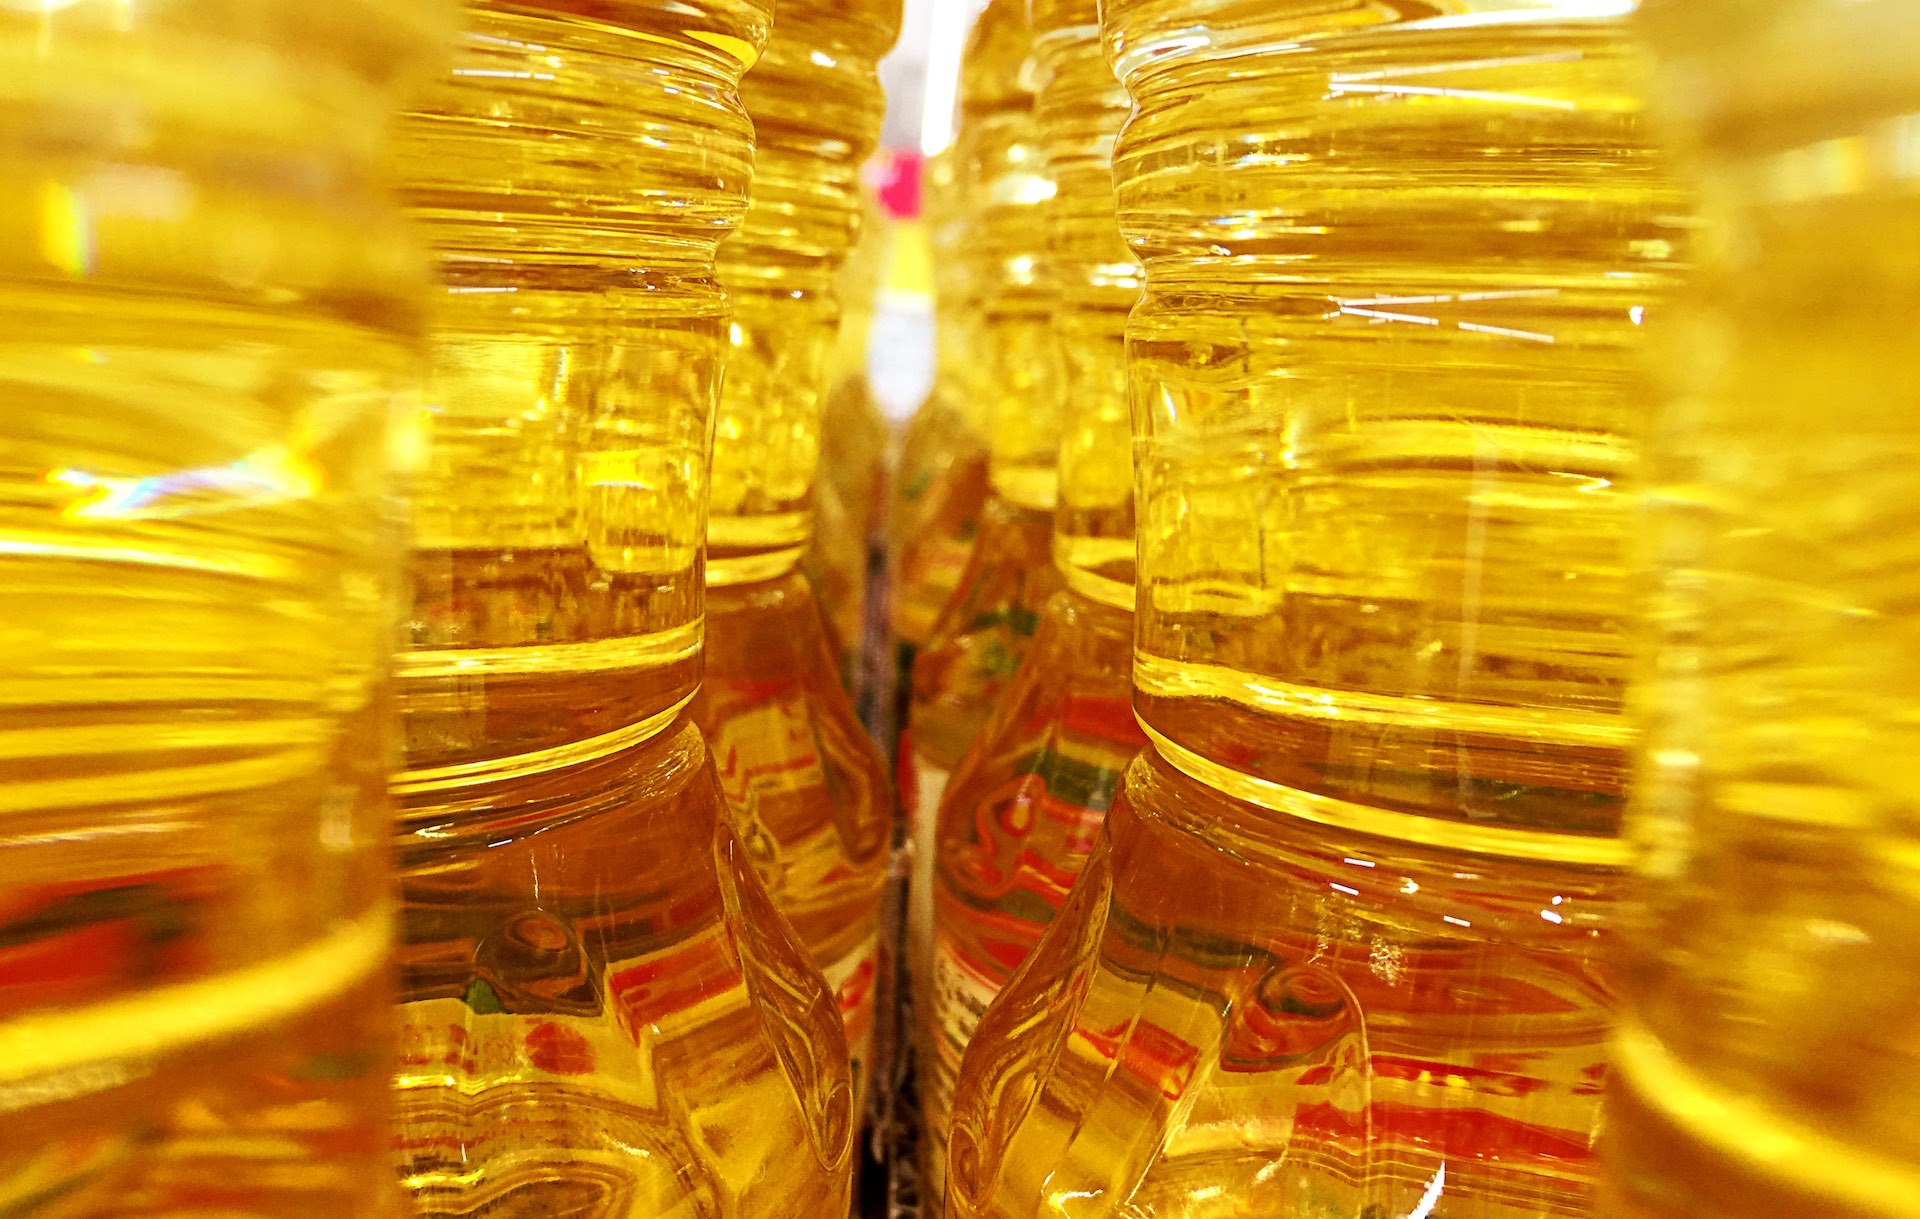 Jordan Government sets a ceiling on the retail price of cooking oil